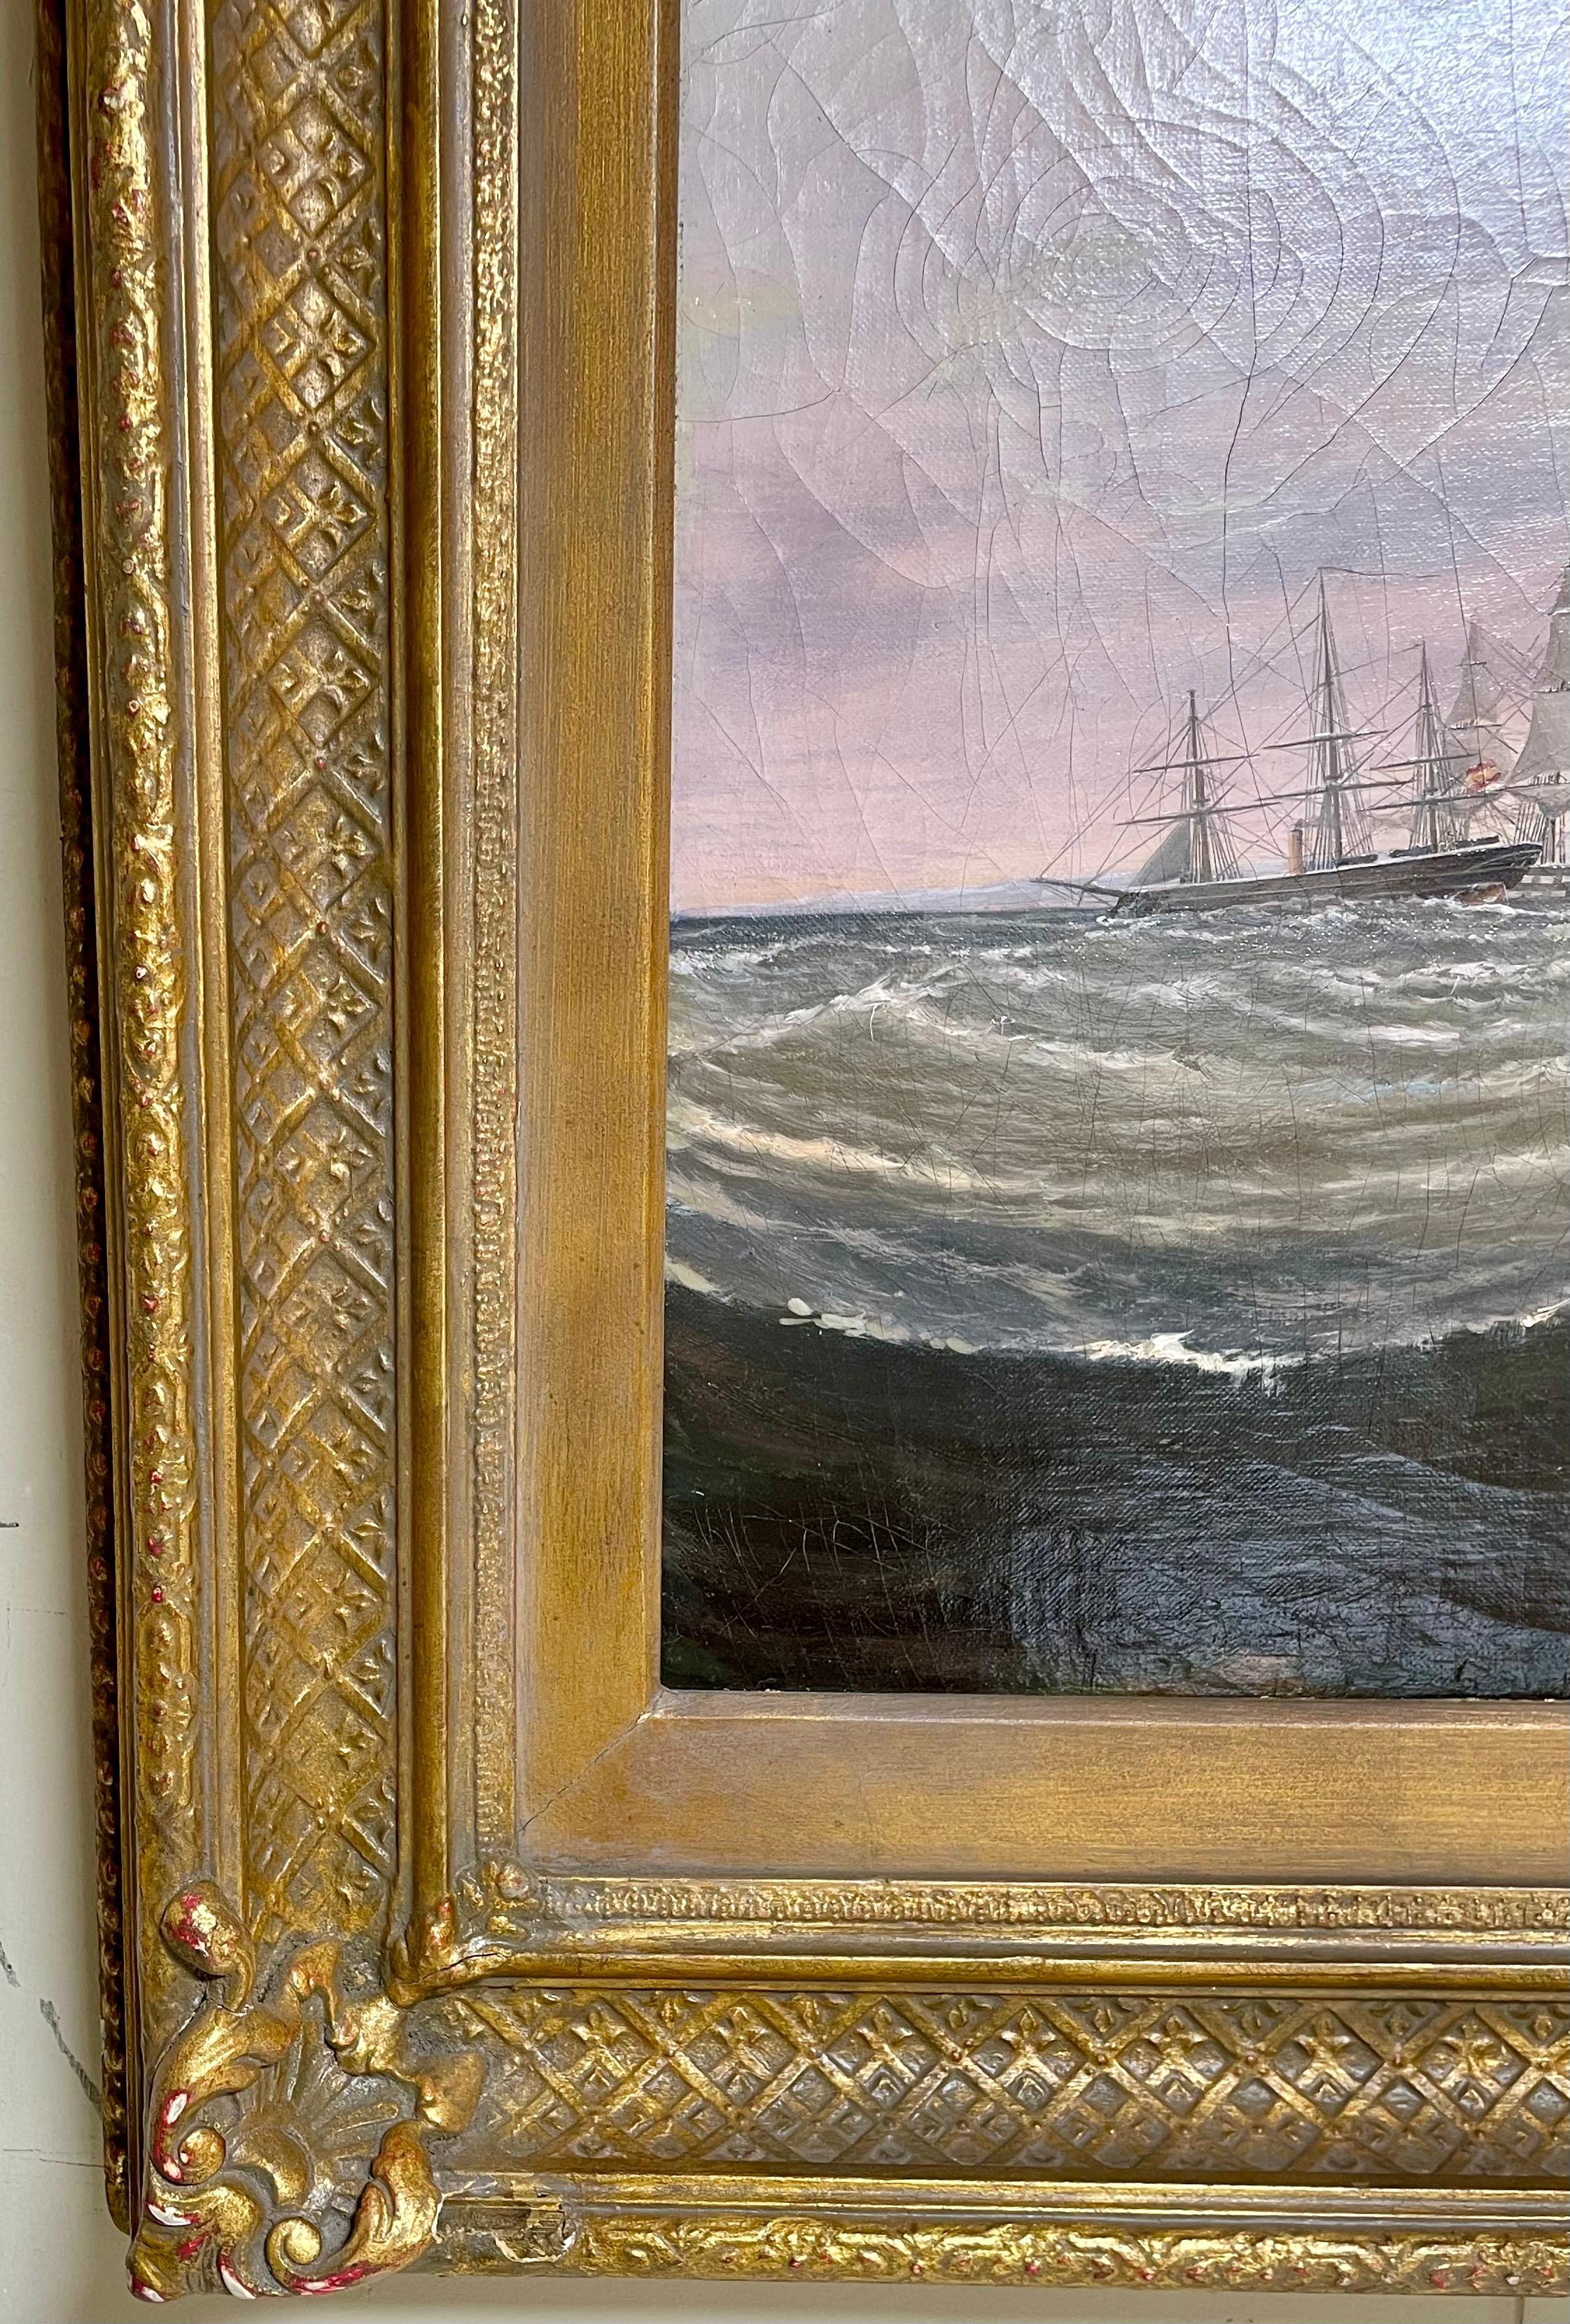 19th Century Large Antique English Oil on Canvas Ship Painting by Charles Keith Miller, 1876. For Sale